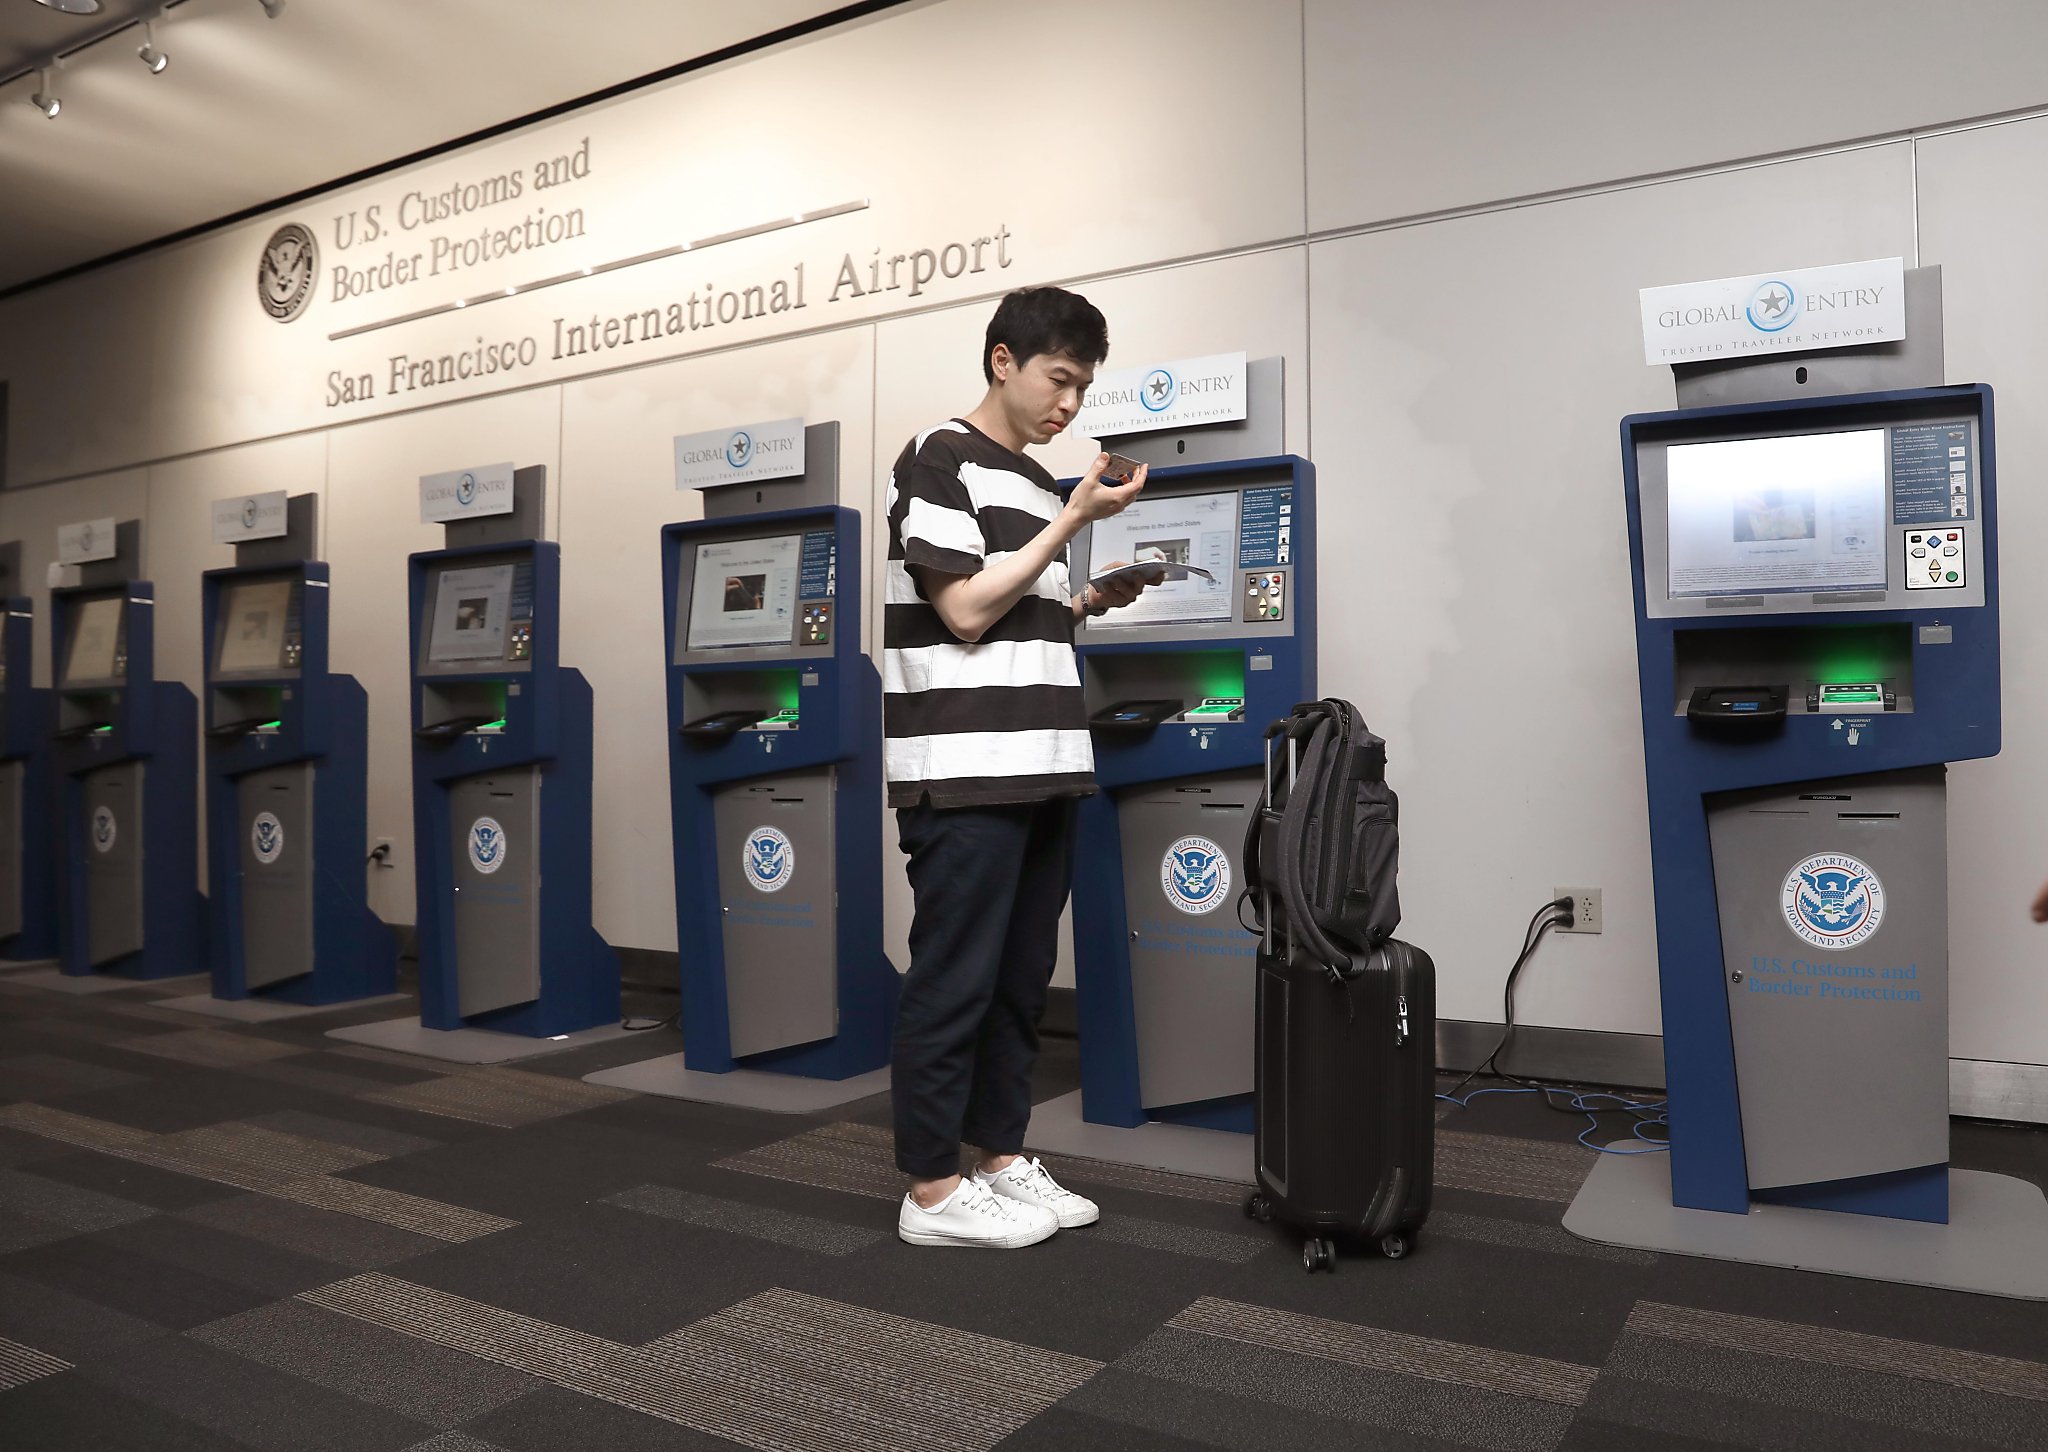 Global Entry is expanding to 9 more airports